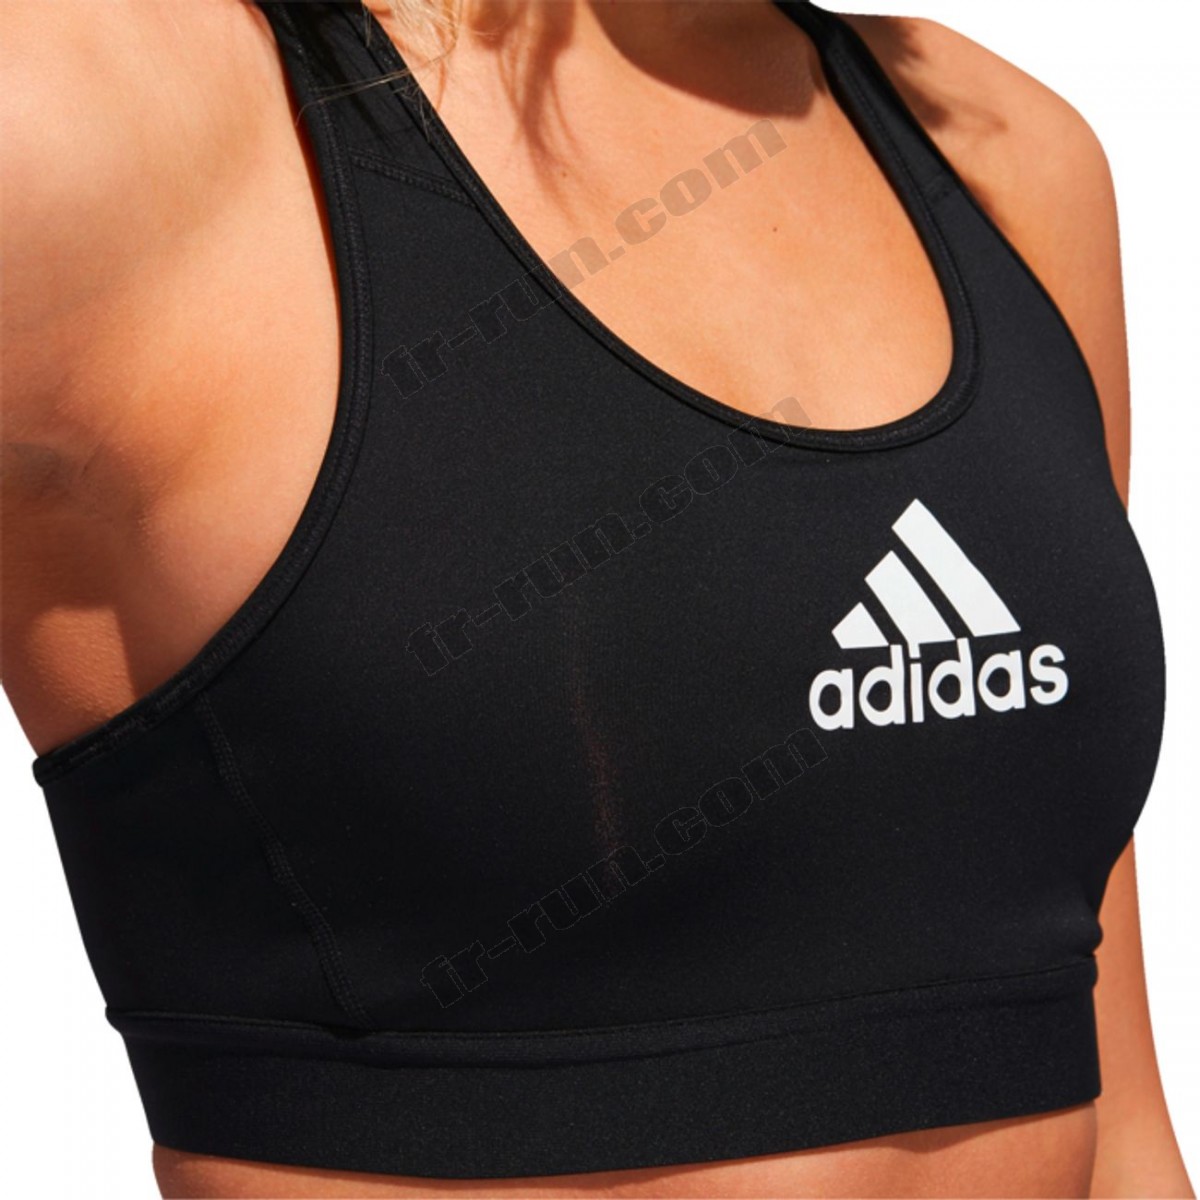 Adidas/BRASSIERE Fitness femme ADIDAS DRST ASK √ Nouveau style √ Soldes - -4